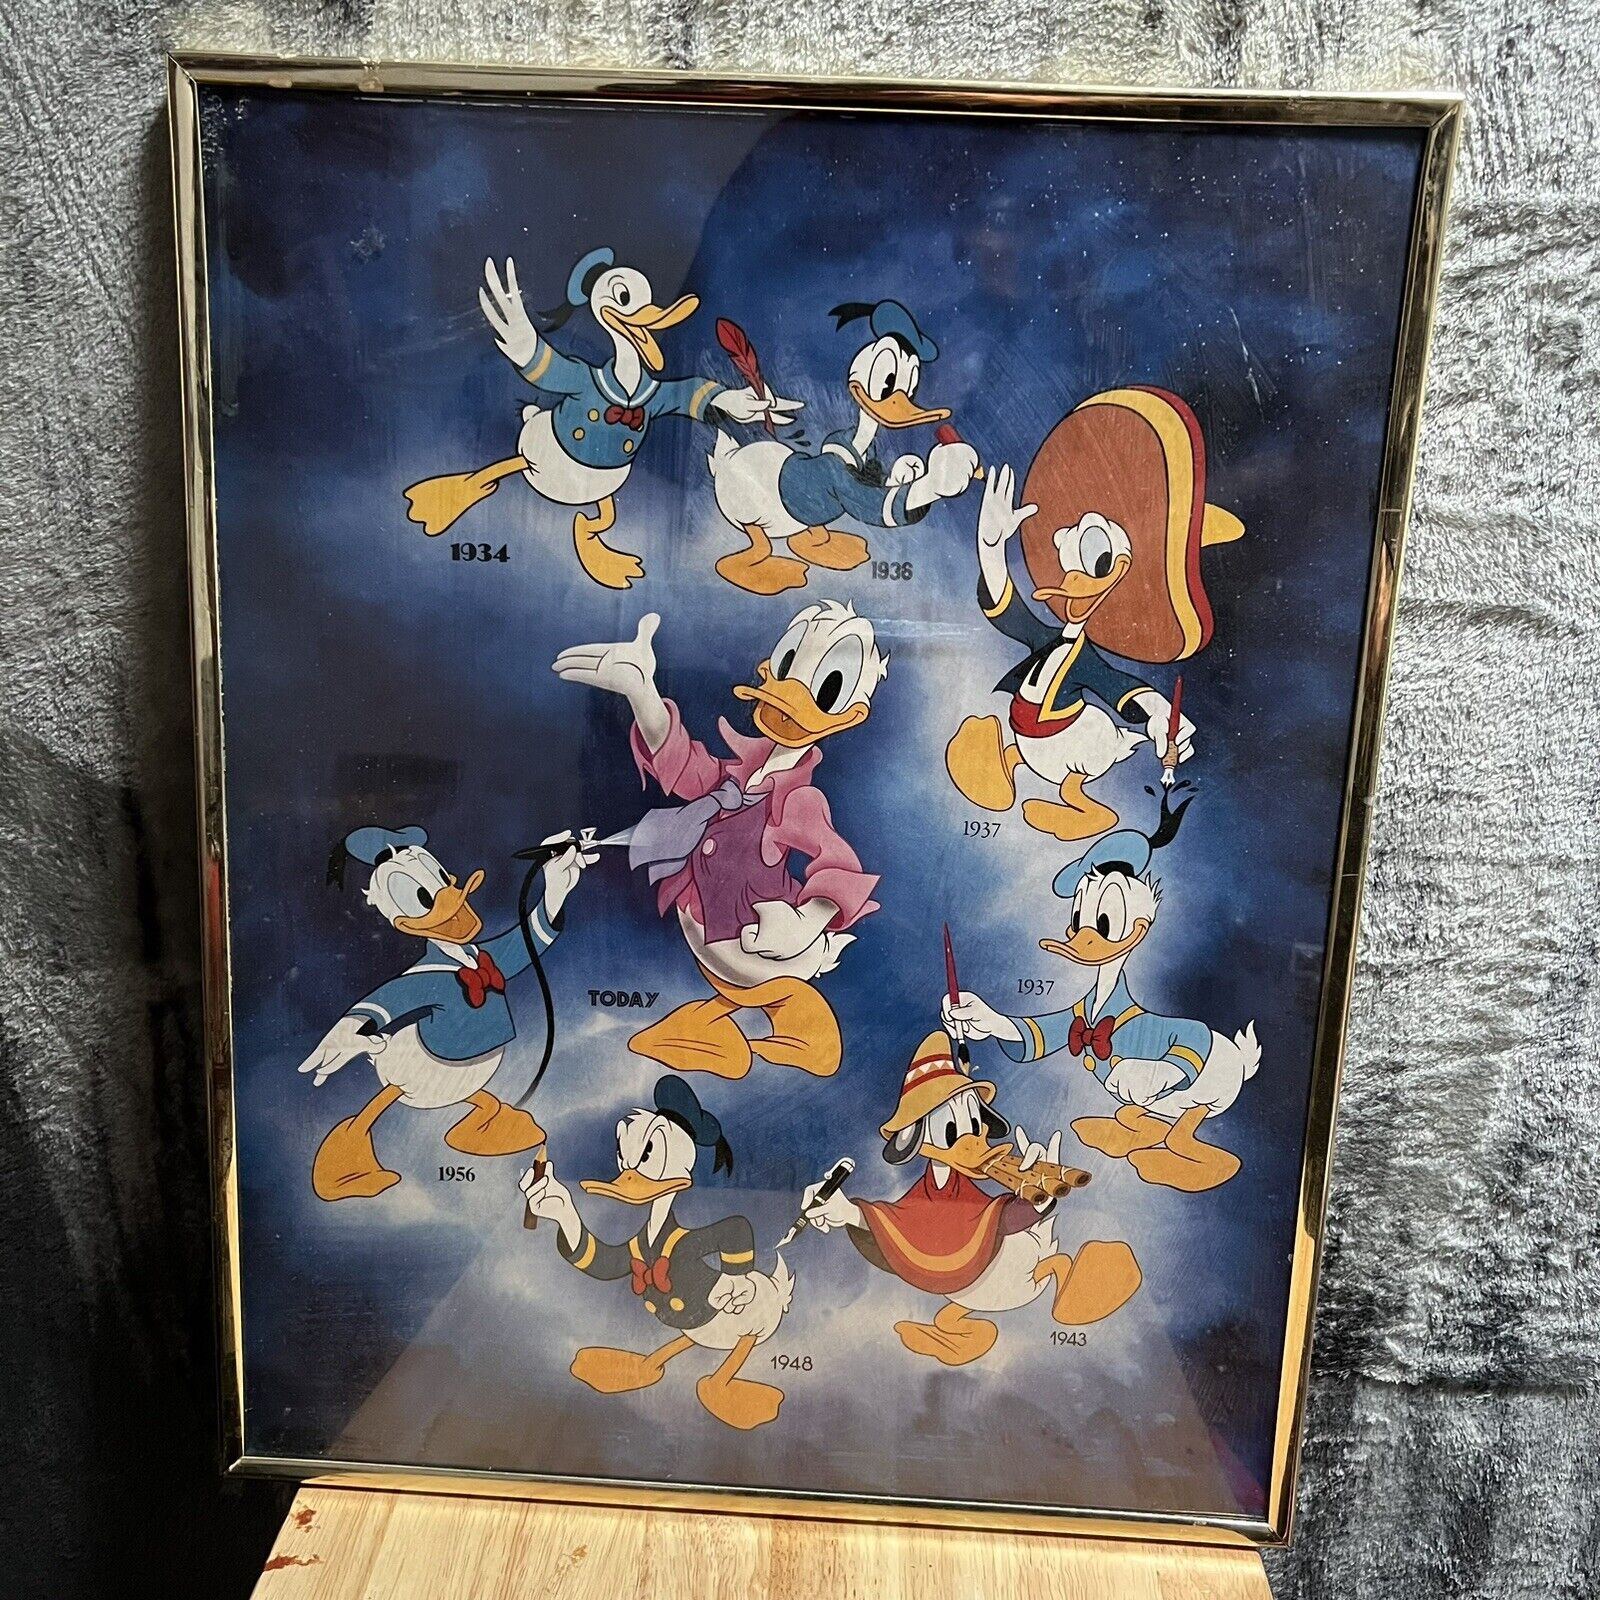 Vintage Very RARE DISNEY Donald Duck 1934 - TODAY Framed Poster ART 20”x 16”